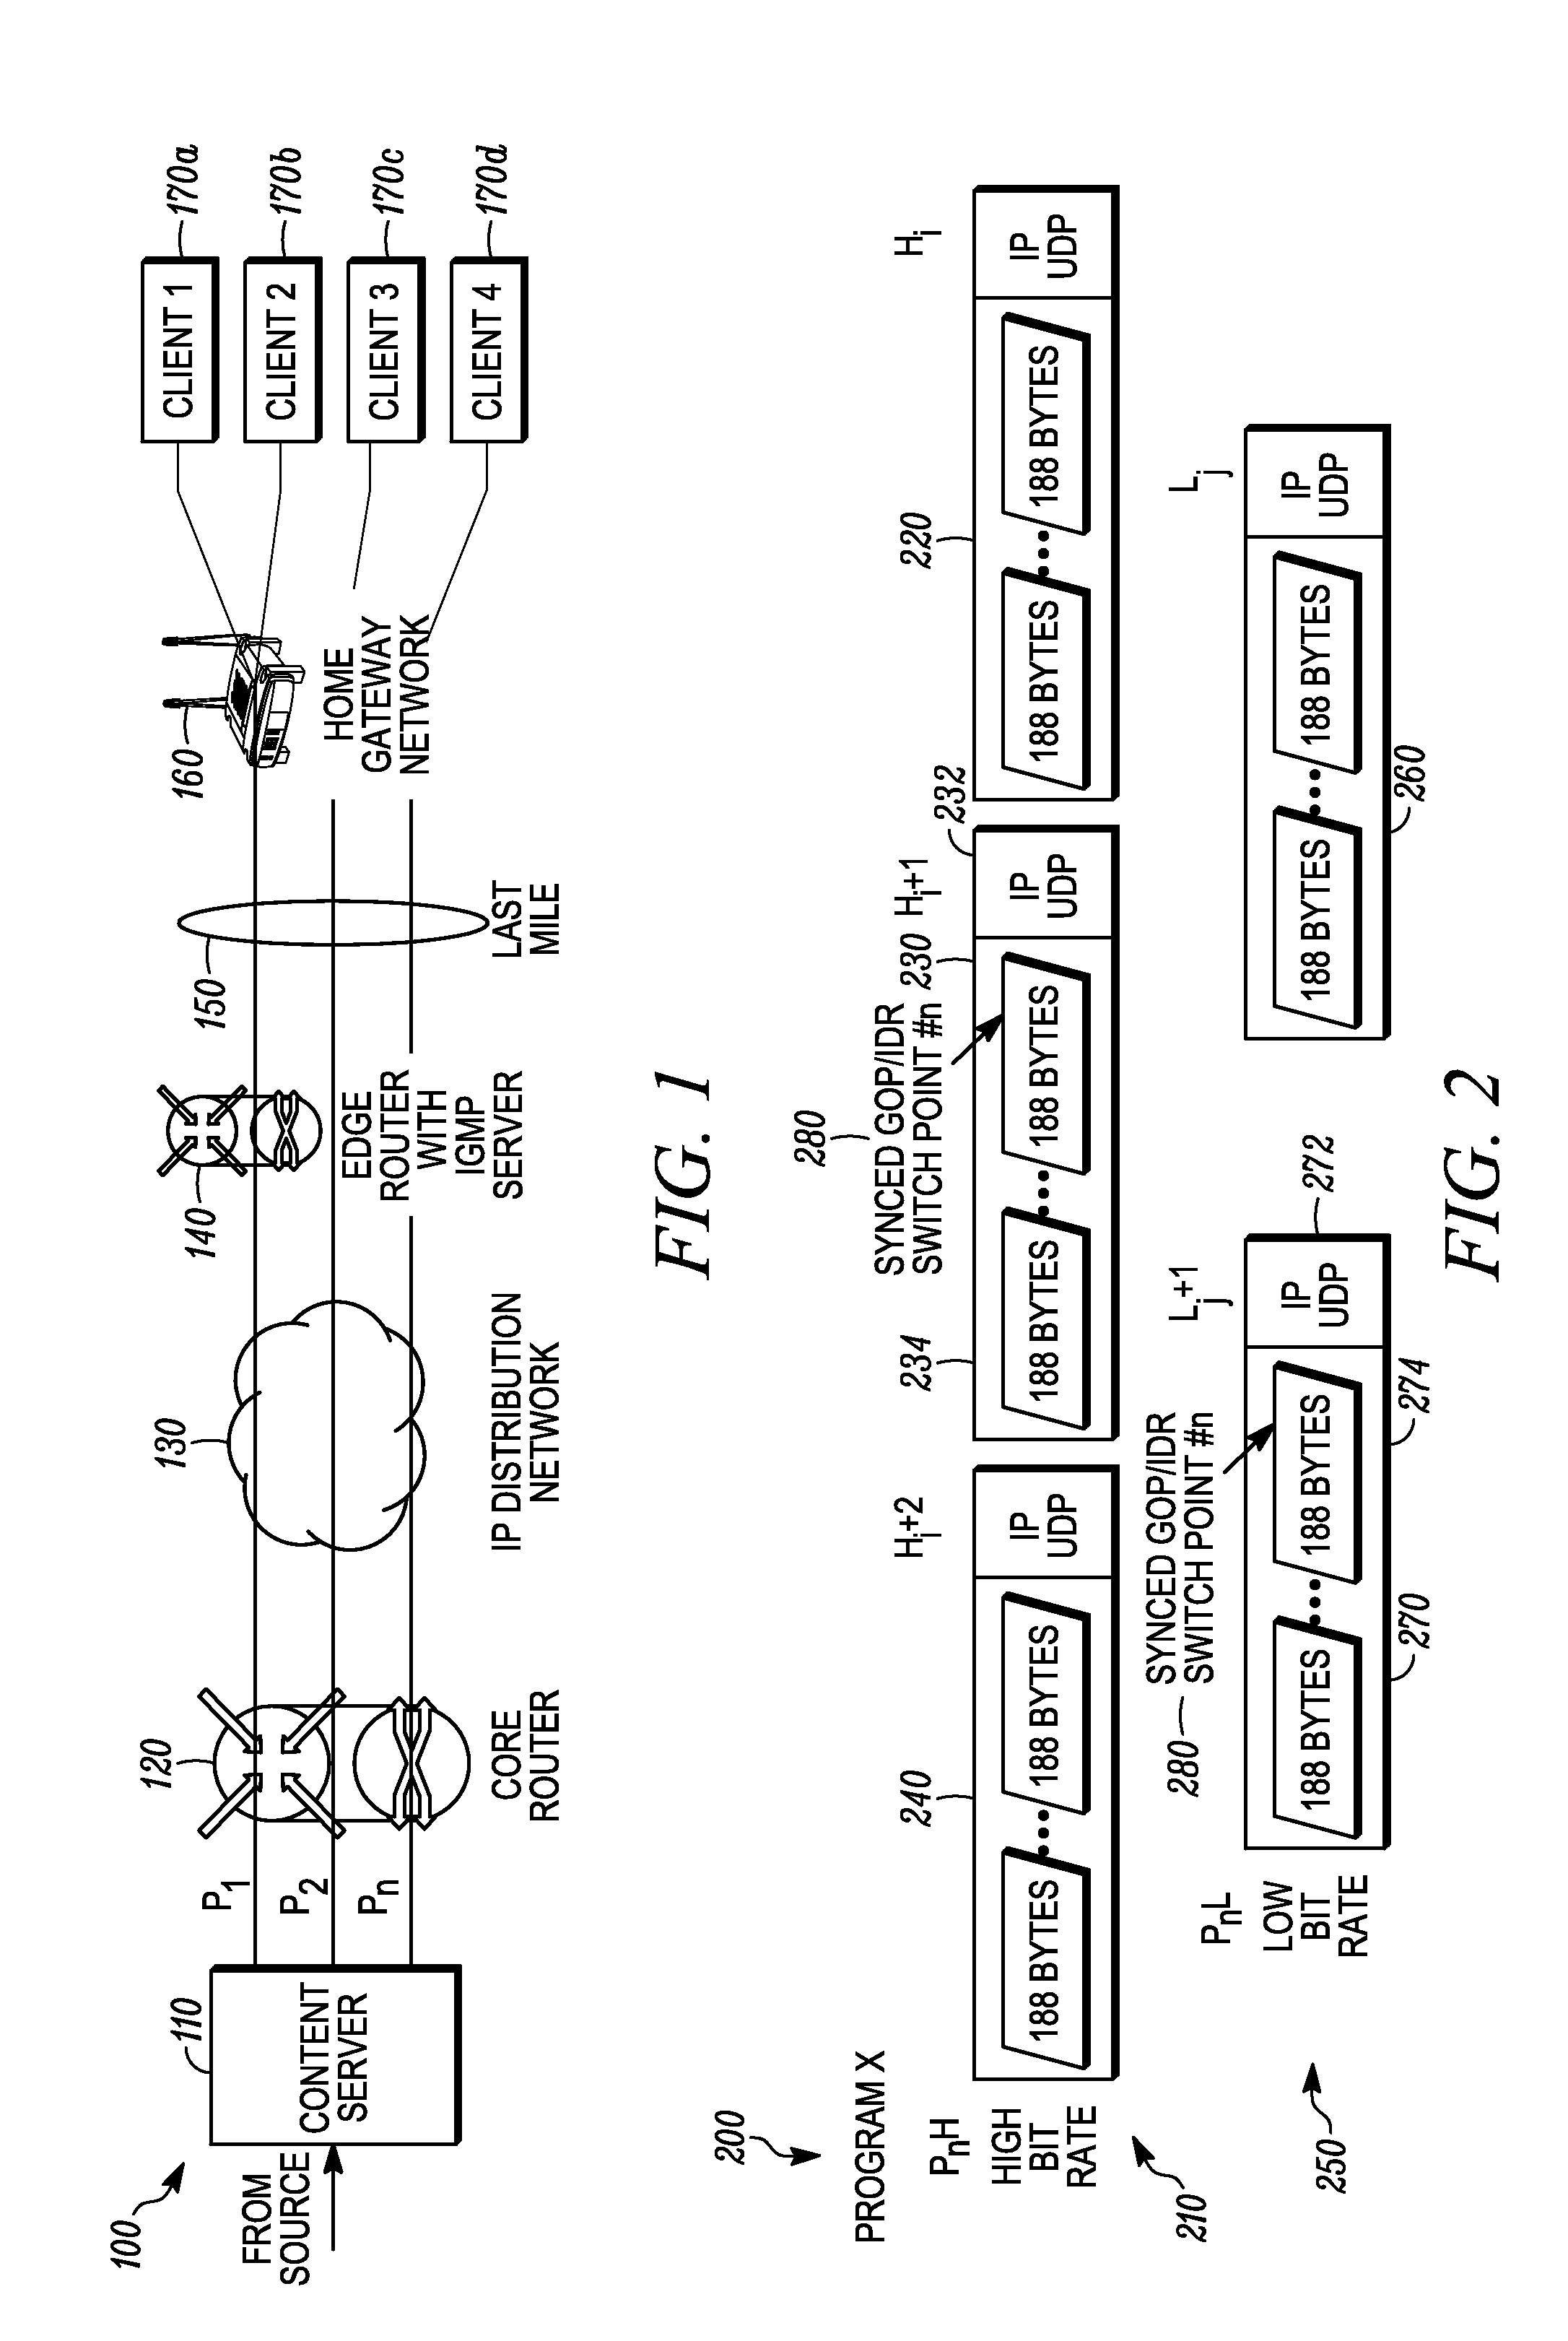 Devices, systems, and methods for adaptive switching of multicast content delivery to optimize bandwidth usage